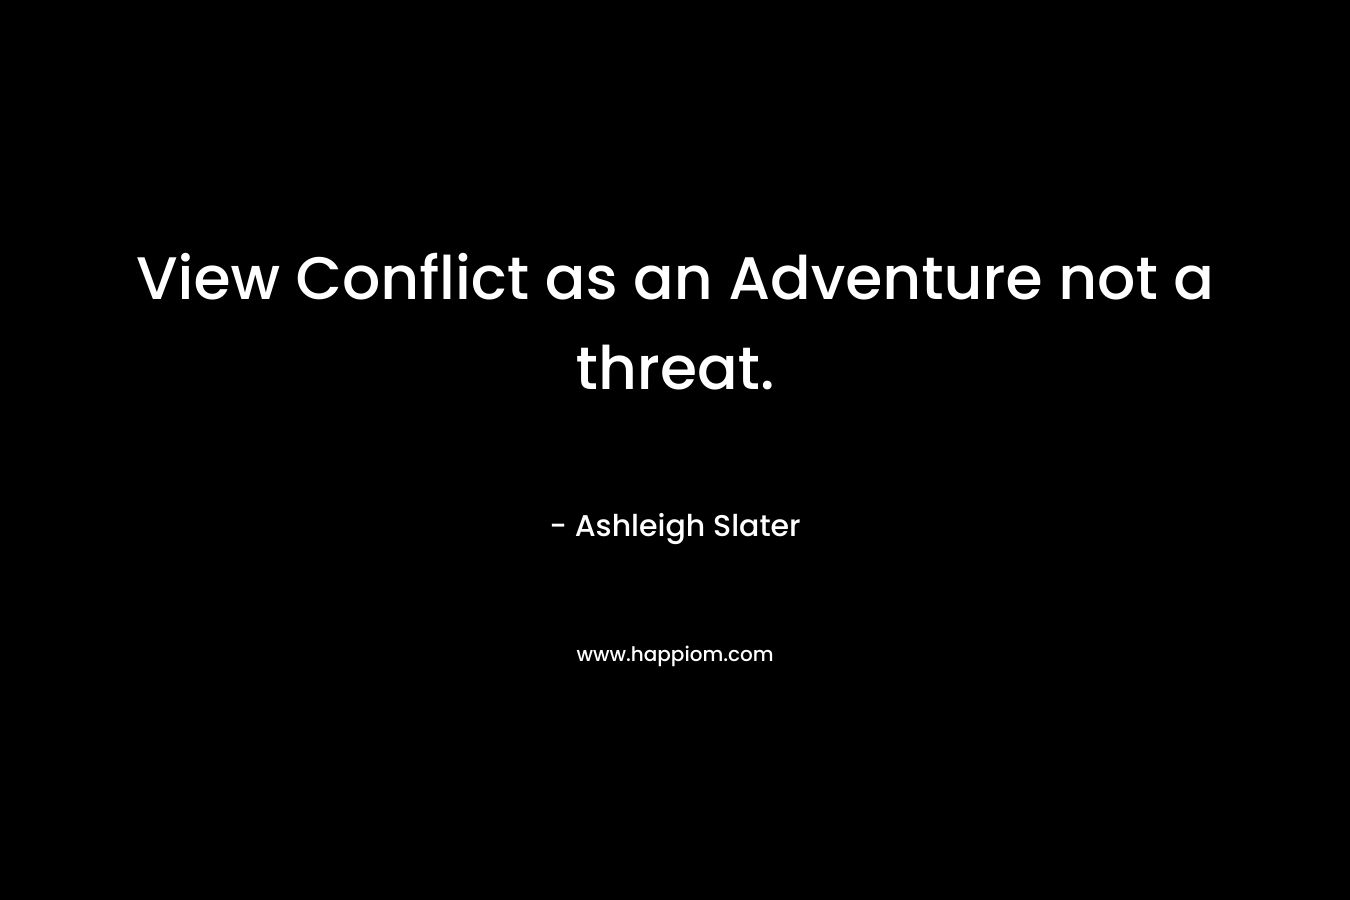 View Conflict as an Adventure not a threat.